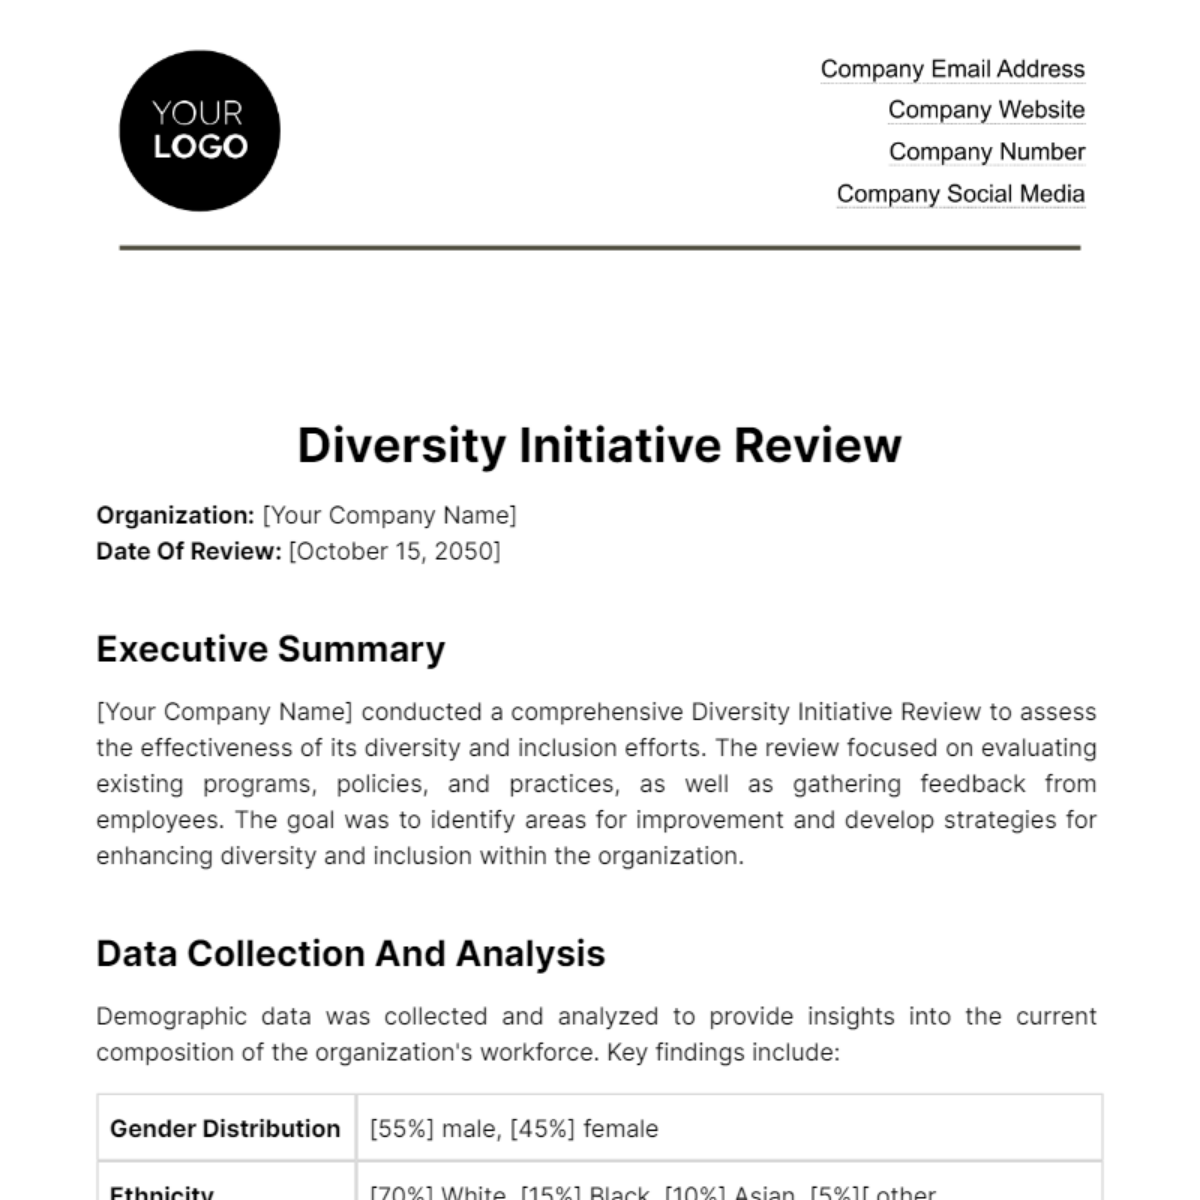 Diversity Initiative Review HR Template